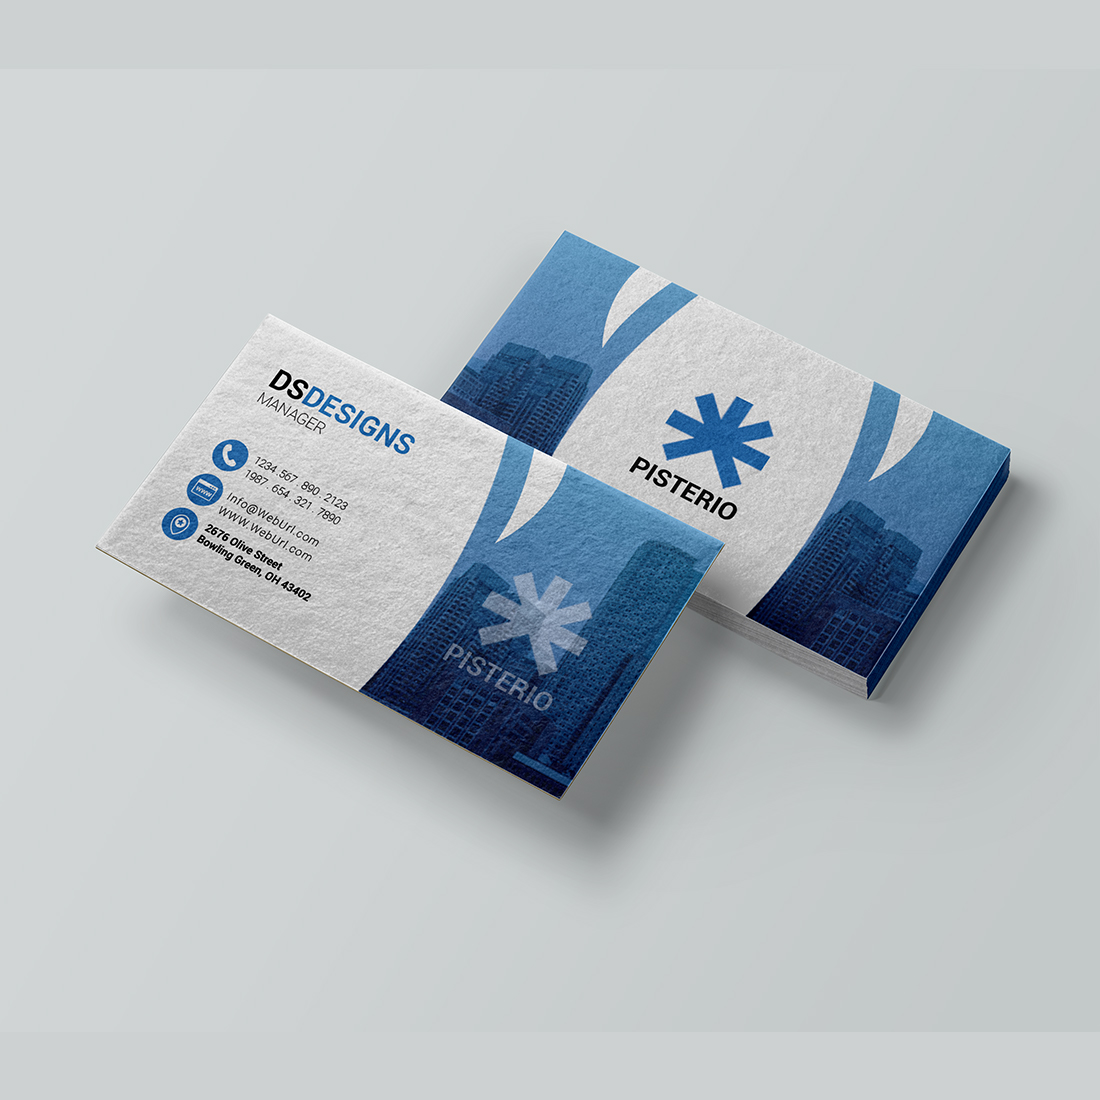 Gradient business card design ( Best for Professional businesses ) cover image.